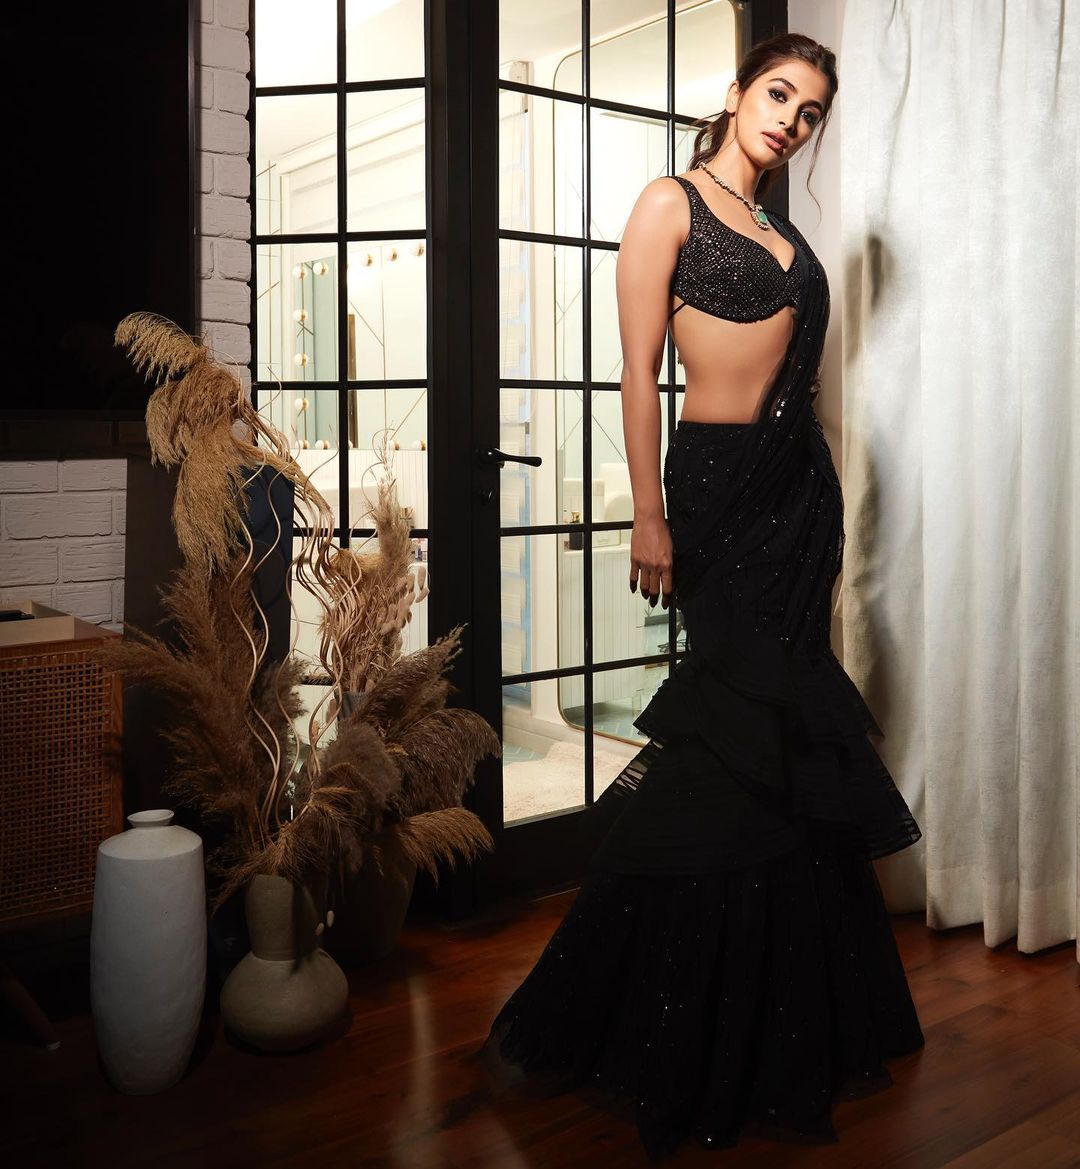 The Showstopper Of Pooja Hegde's Stunning Black Saree Is The Shimmery  Backless Blouse She Paired With It